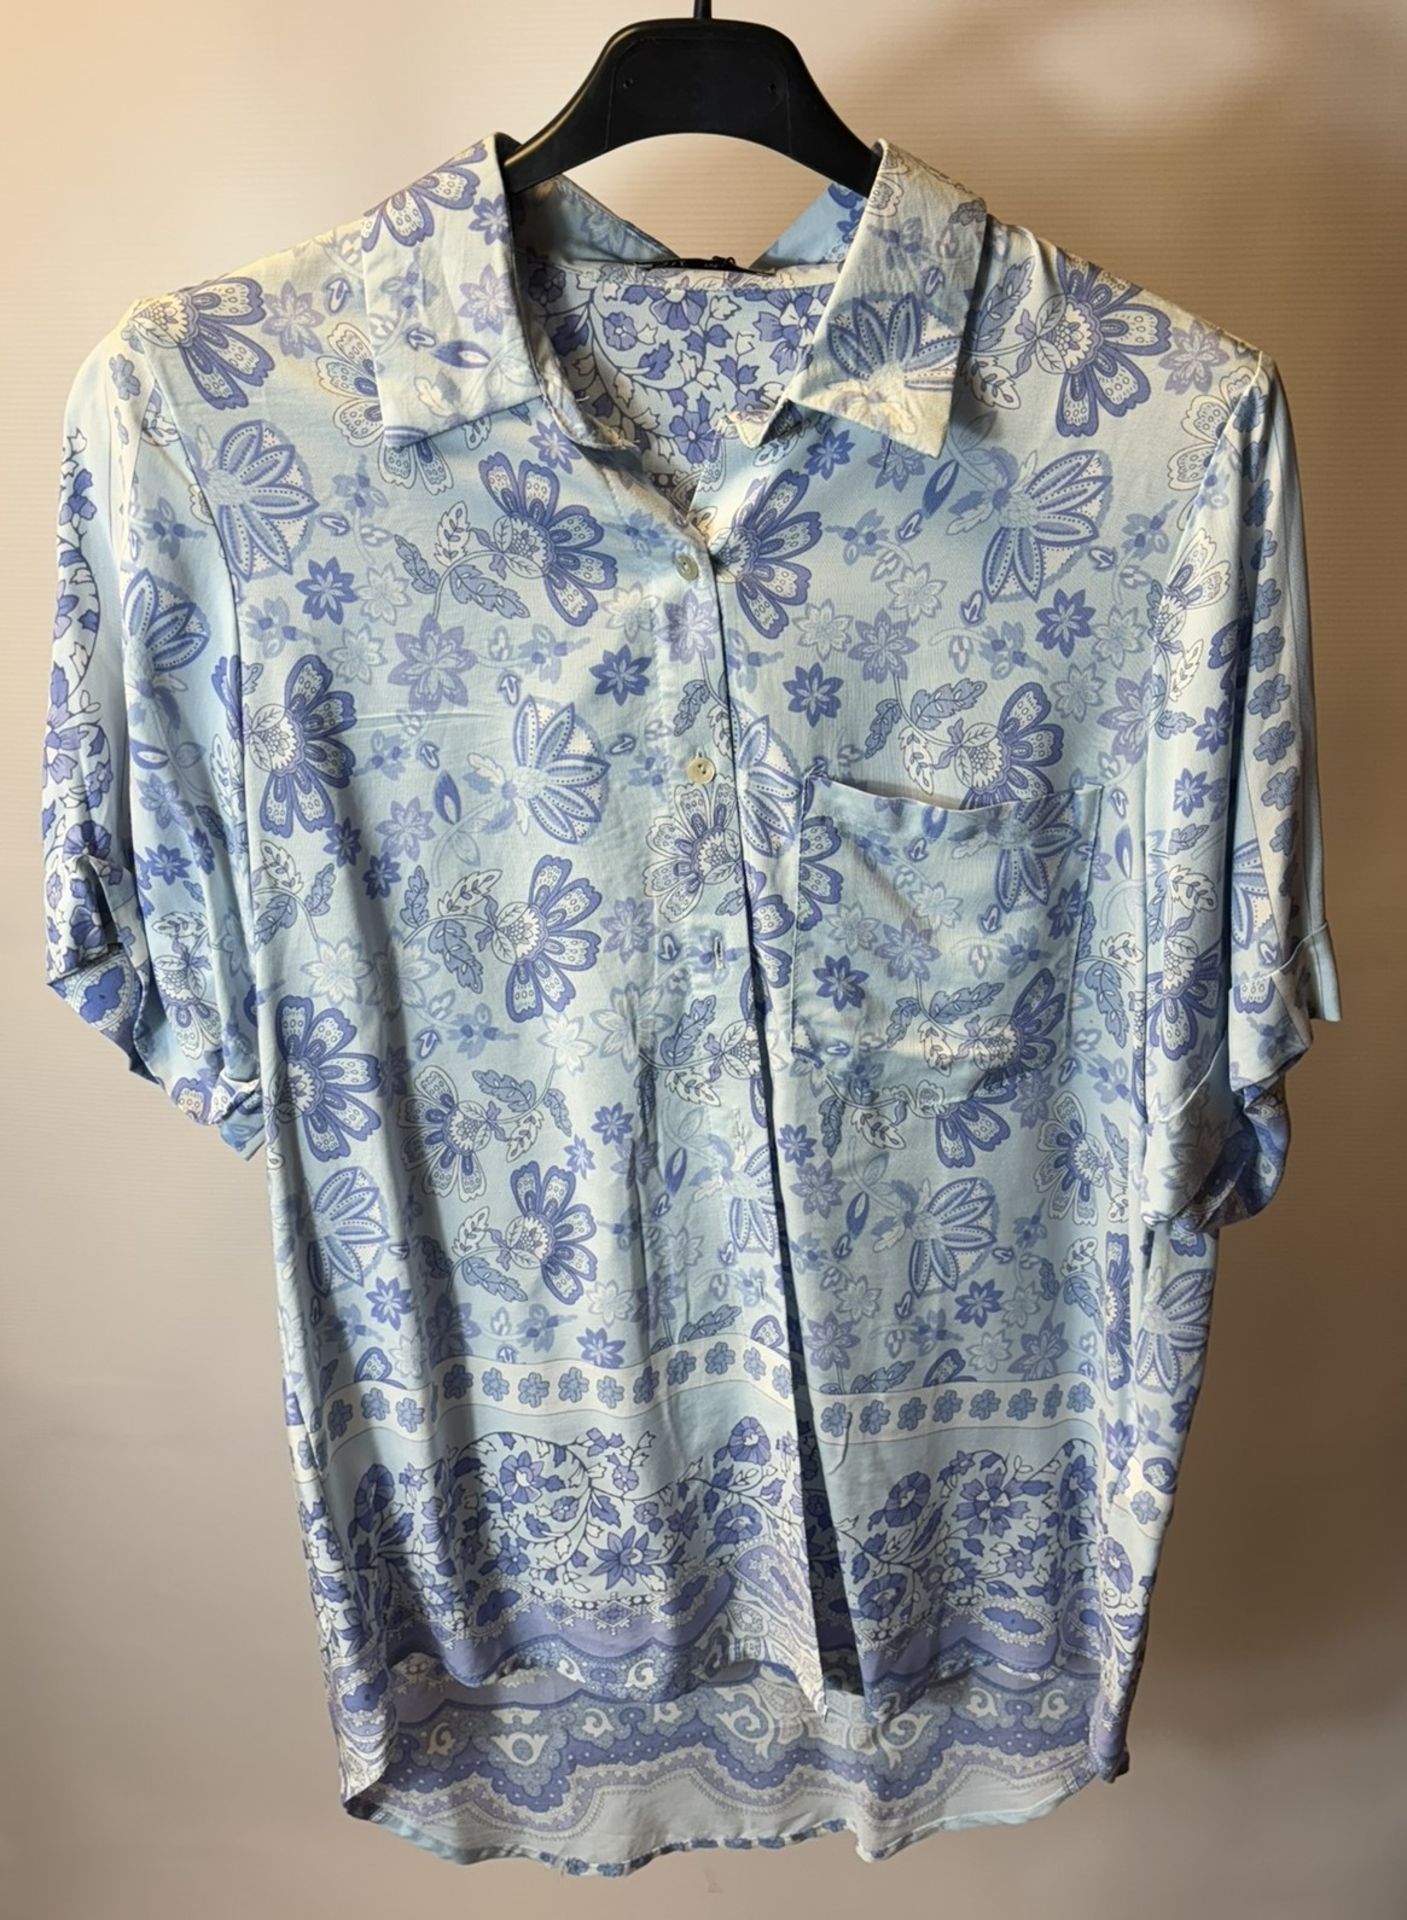 15 x Various Women's Tops/Blouses/Shirts As Seen In Photos - Image 10 of 45